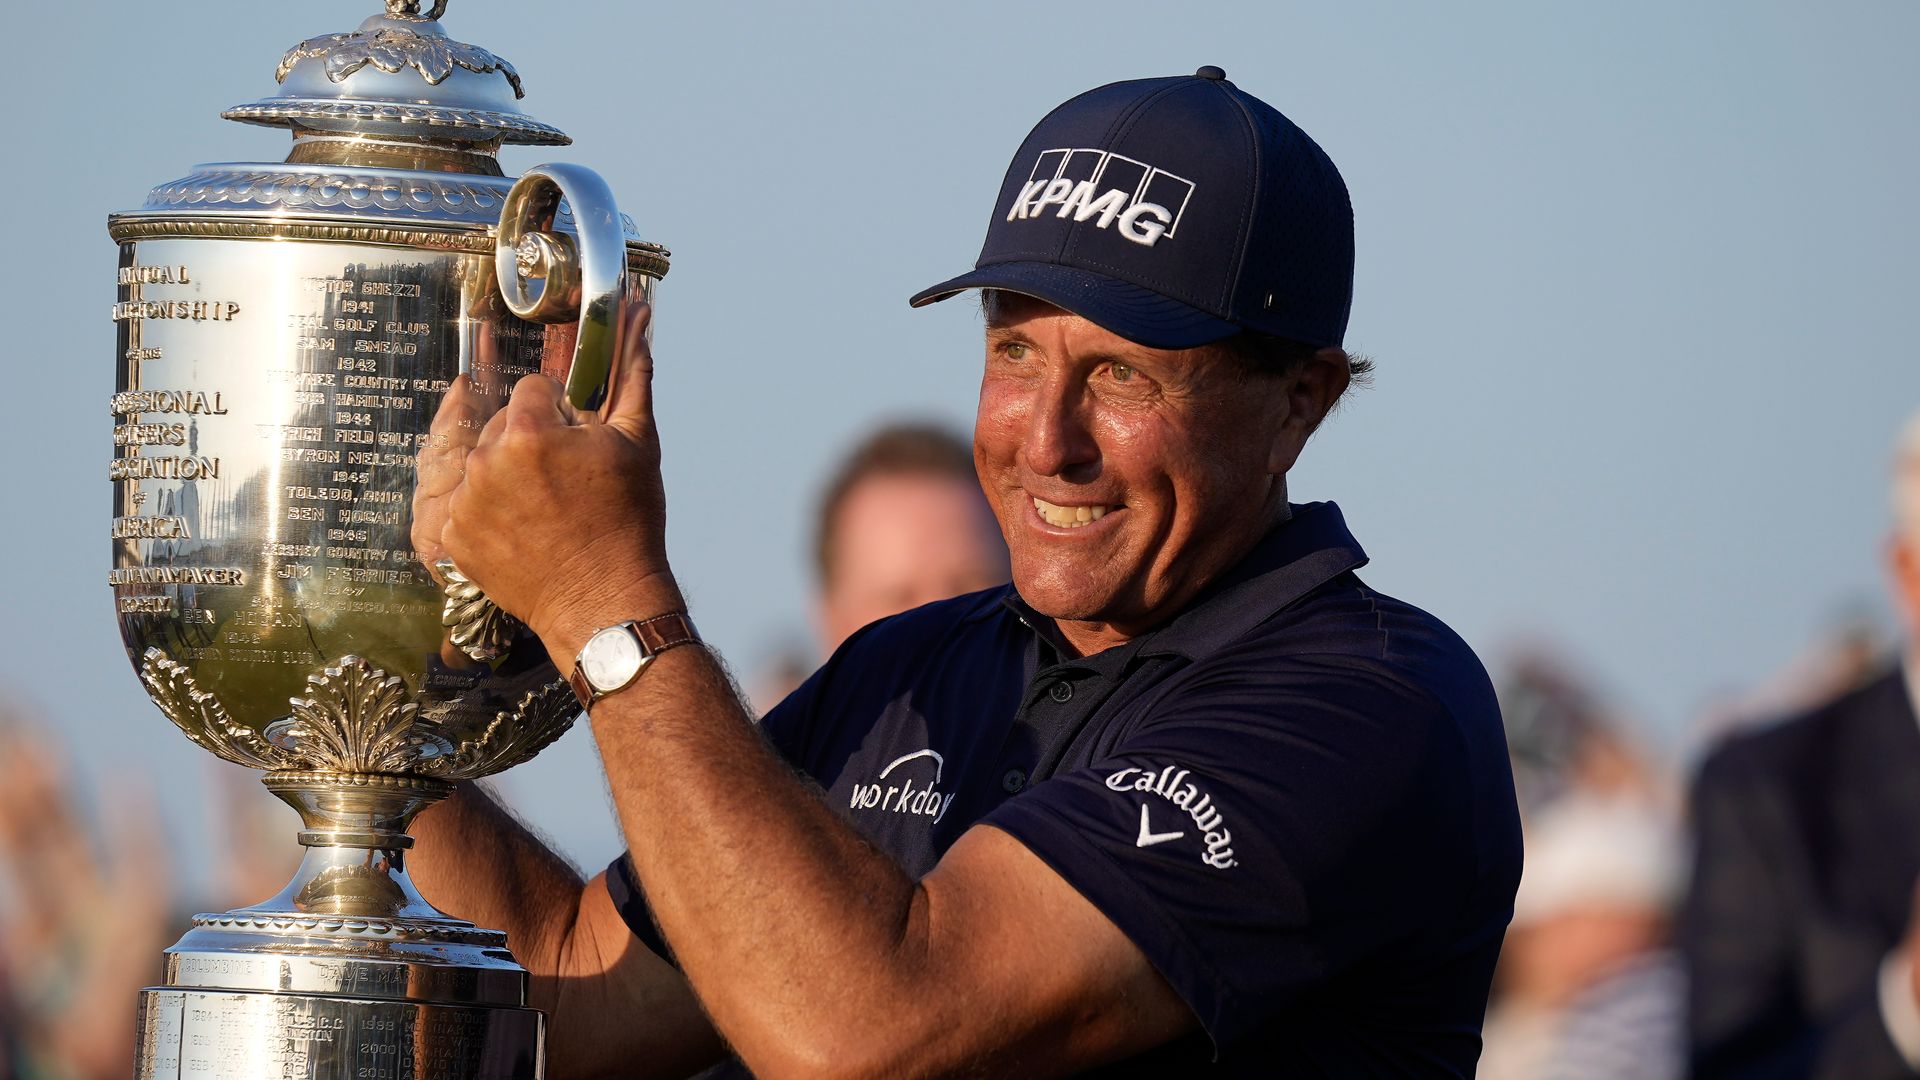 Beem: Mickelson is a great but this could tarnish his legacy